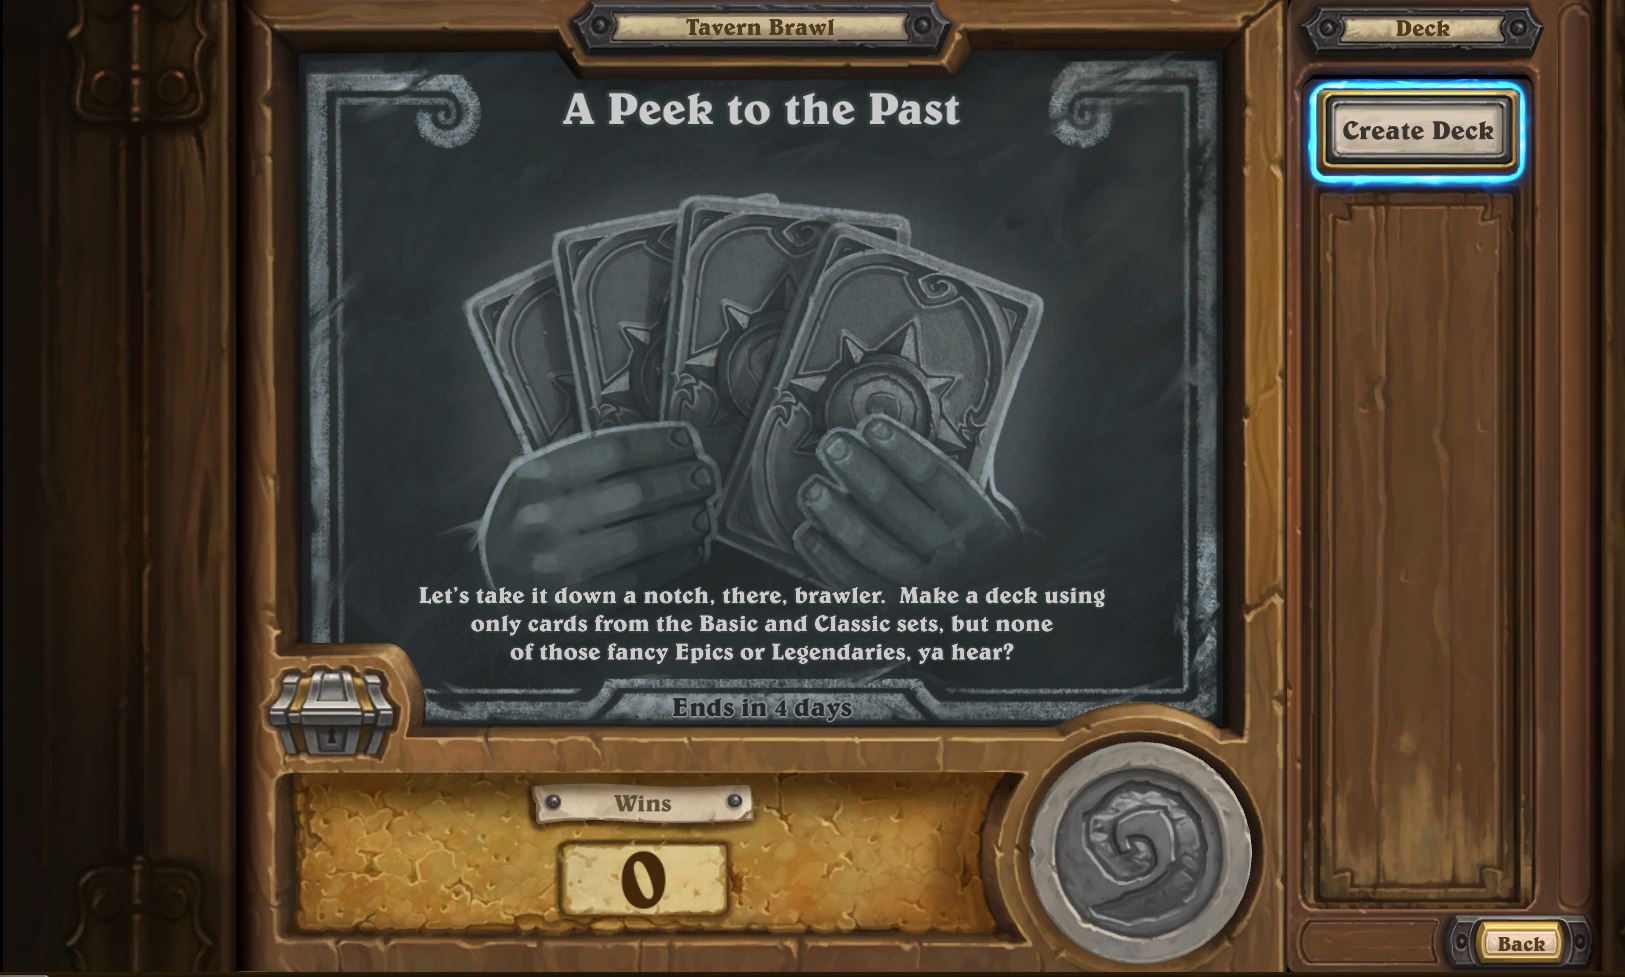 Today's 'Hearthstone' Tavern Brawl Is 'A Peek to the Past' - Only Classic and Basic Cards Allowed